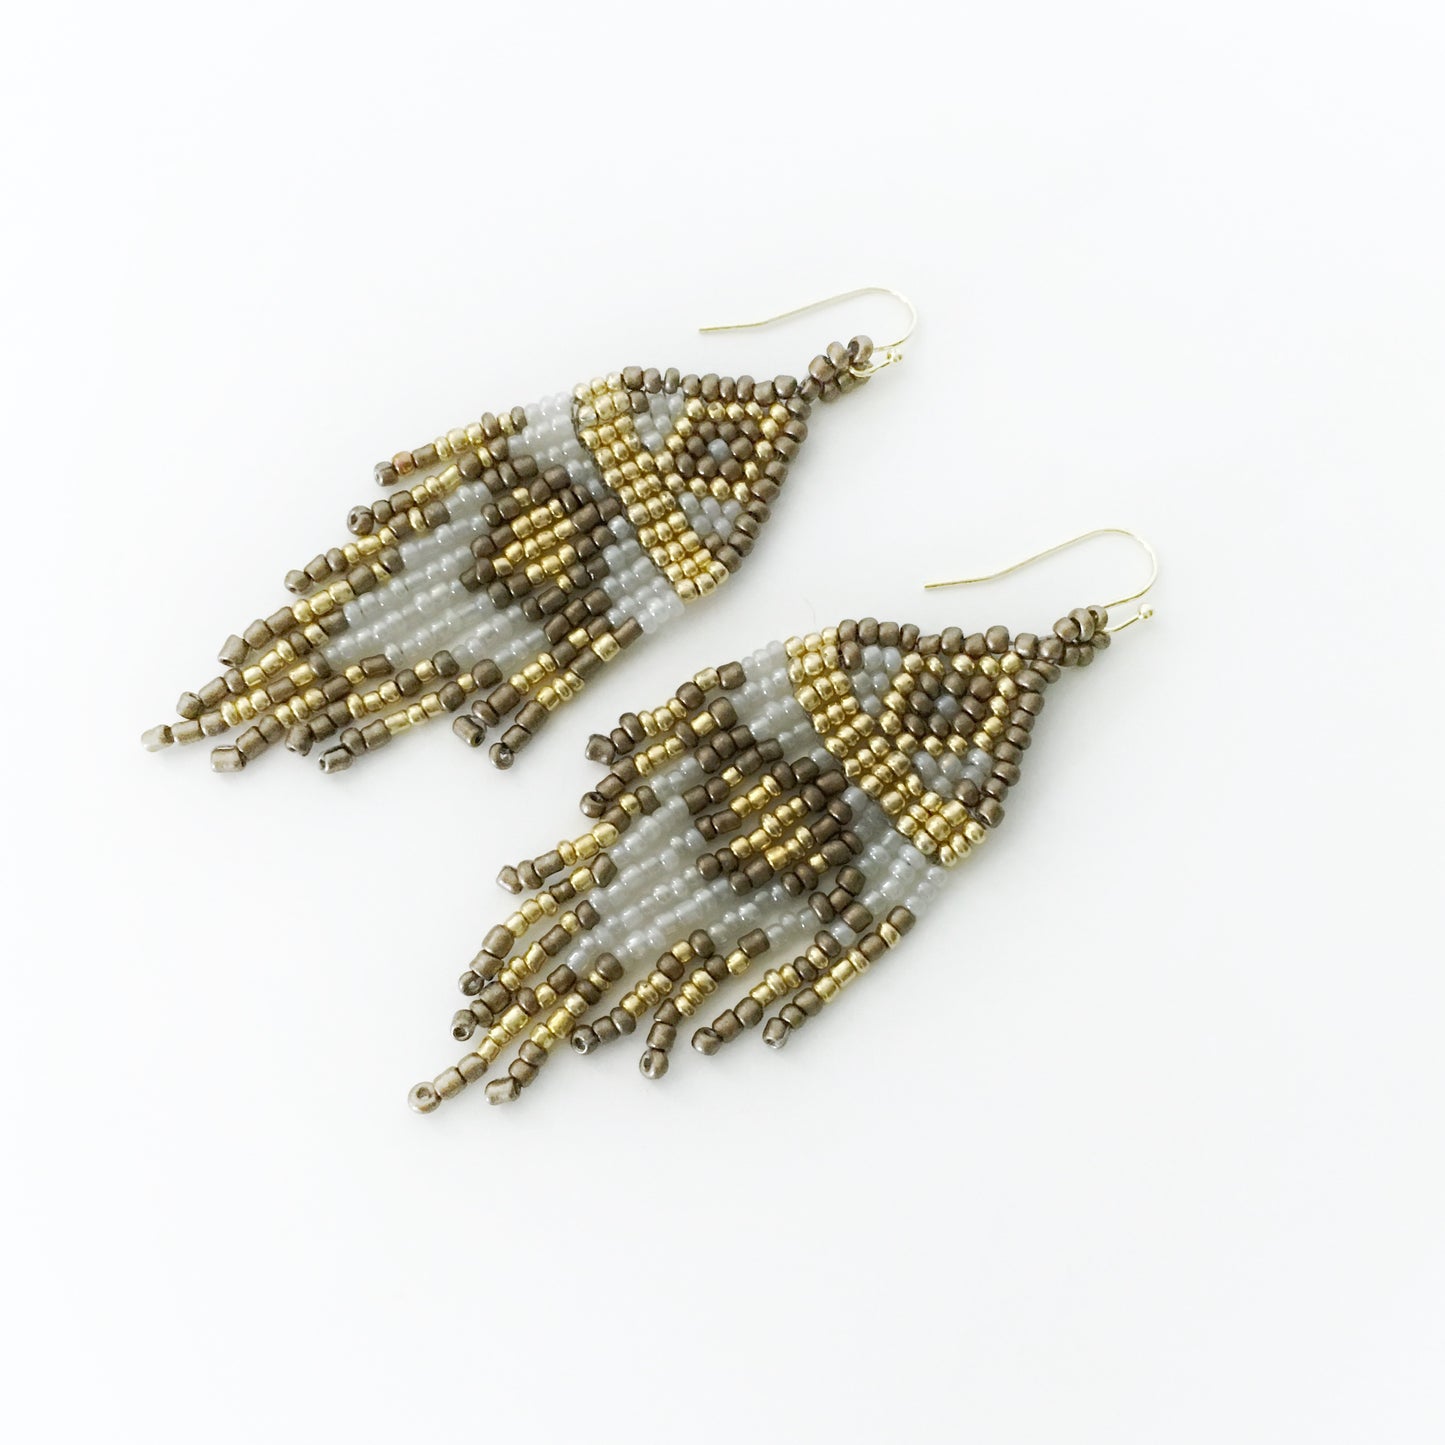 Hand Beaded Fringe Earrings (Brown, Pearlescent, and Gold)